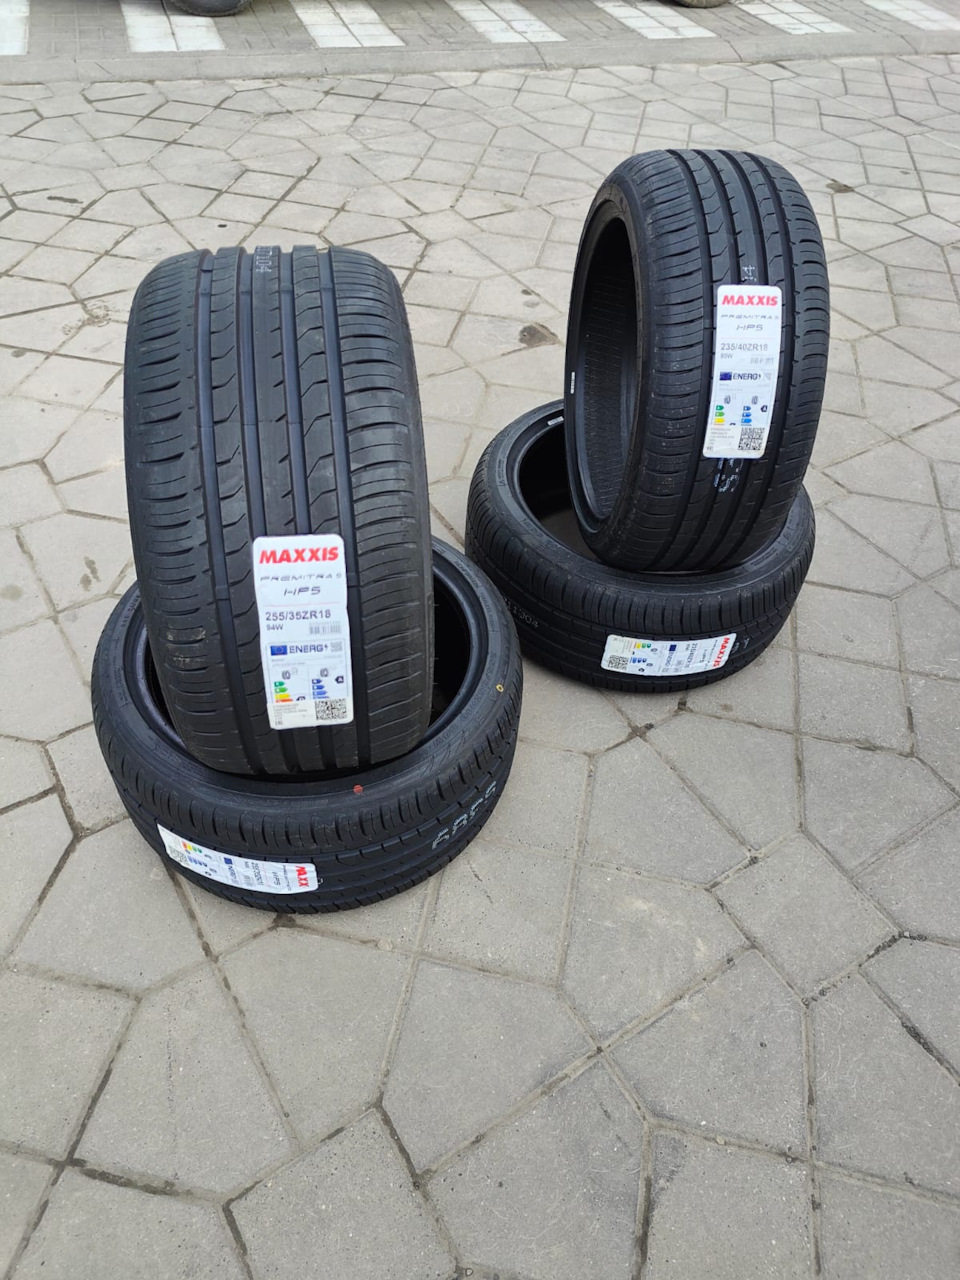 Максис Вектра 225 60 15. Appolo Tyres 4g+ 225 45 r17. 235 45 17 Лето King Boss. Maxxis hp5 205/60 r16.